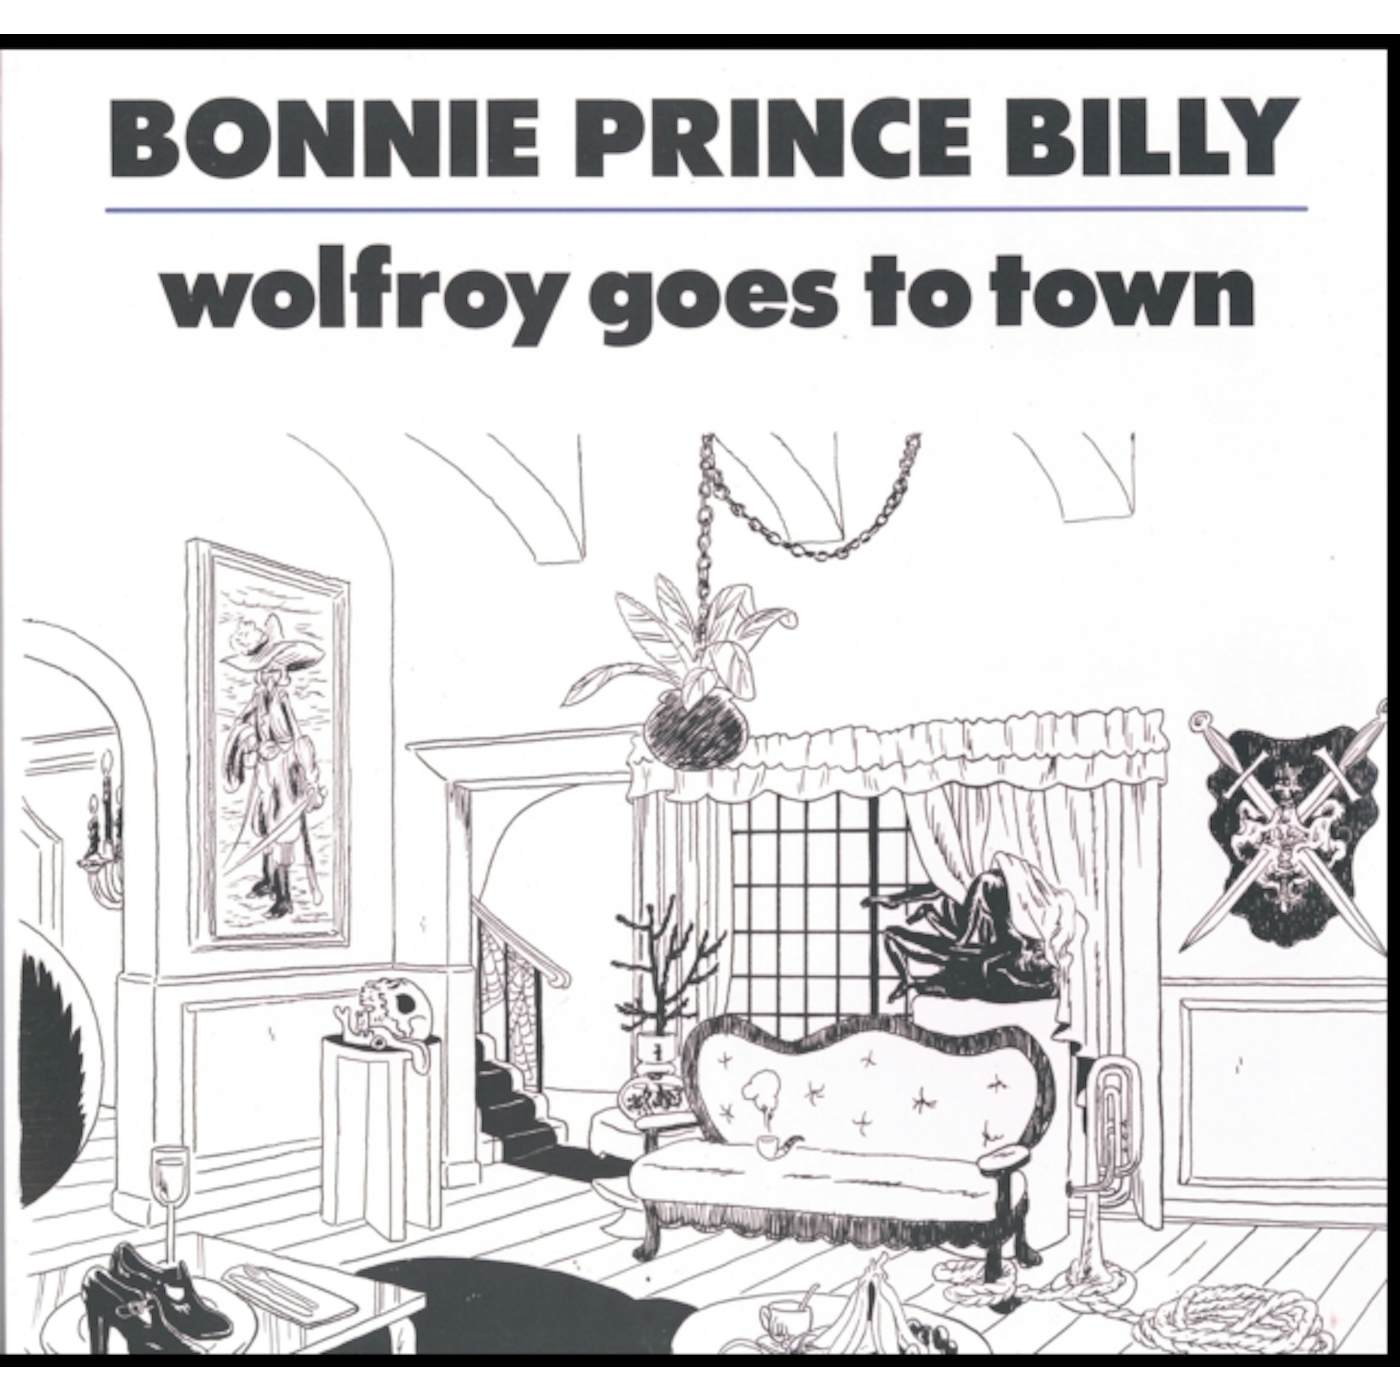 Bonnie Prince Billy WOLFROY GOES TO TOWN Vinyl Record